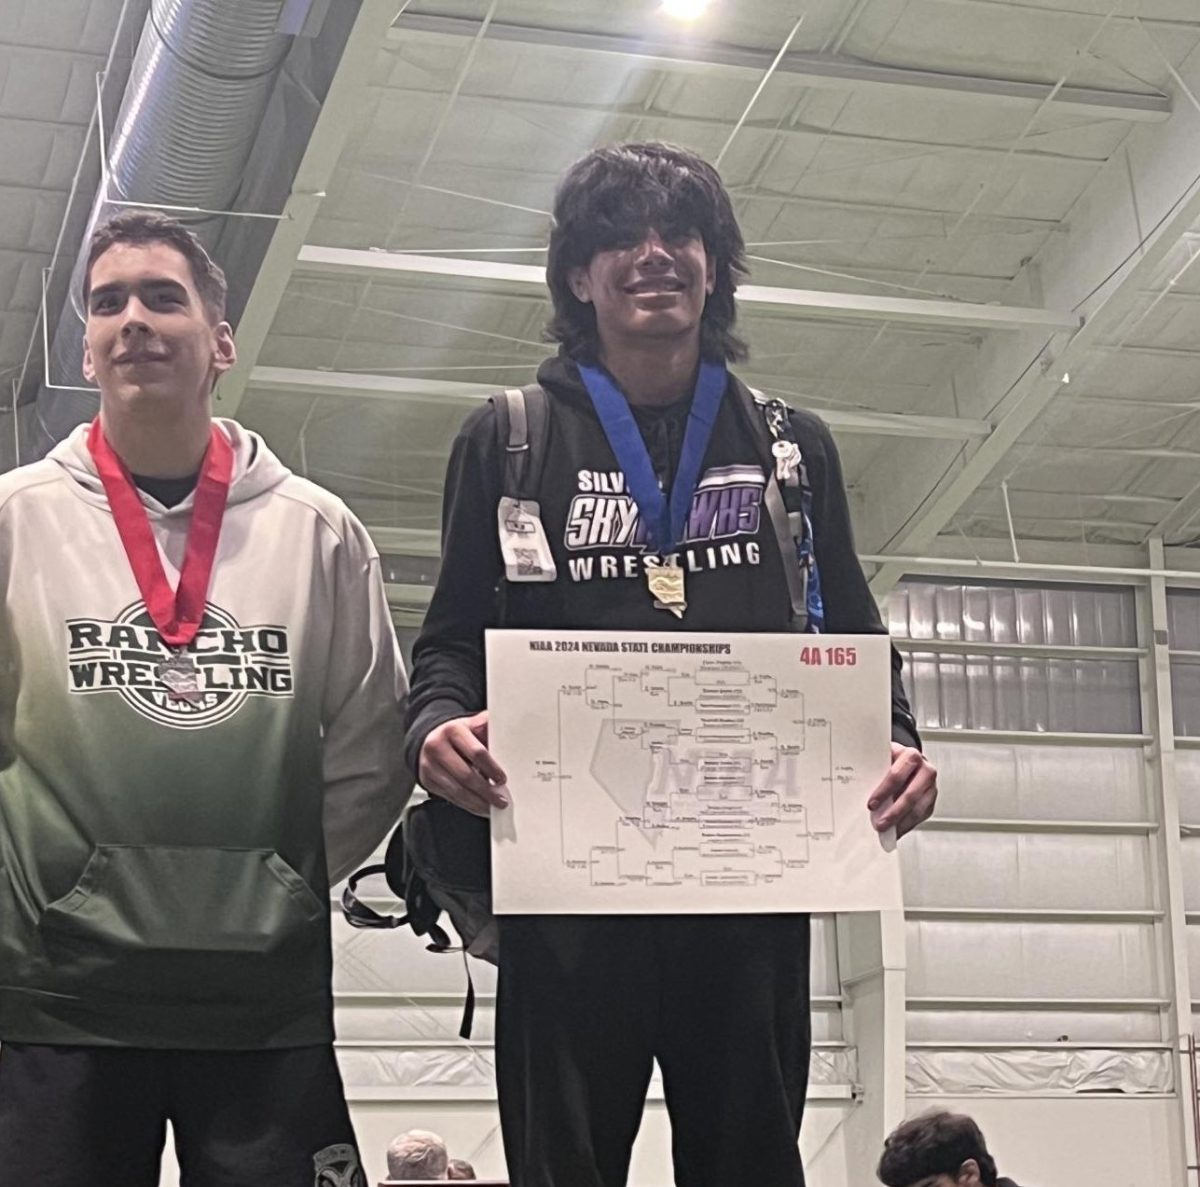 Zyon Trujillo proudly stands on the podium at state championships after winning first place in his weight class on Friday Feb. 16.